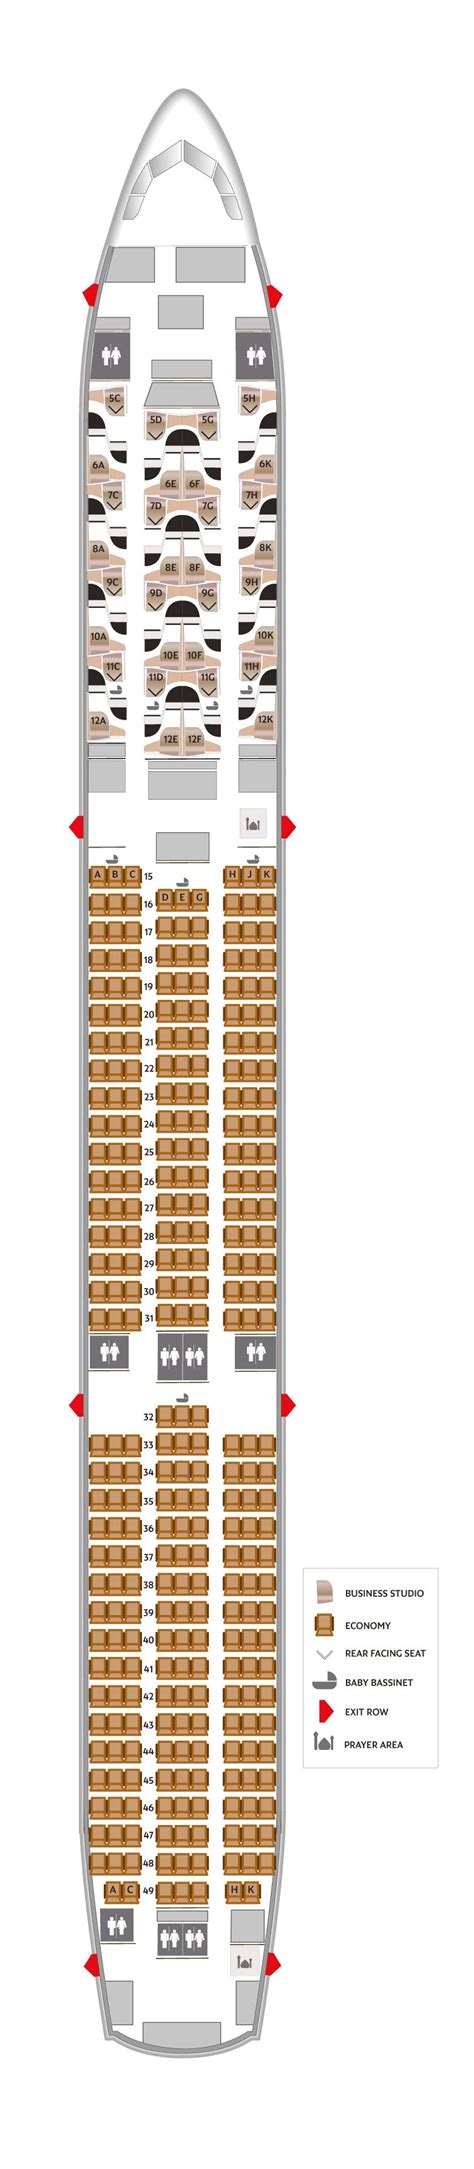 Seat Map And Seating Chart Boeing Dreamliner Etihad Airways 48734 Hot